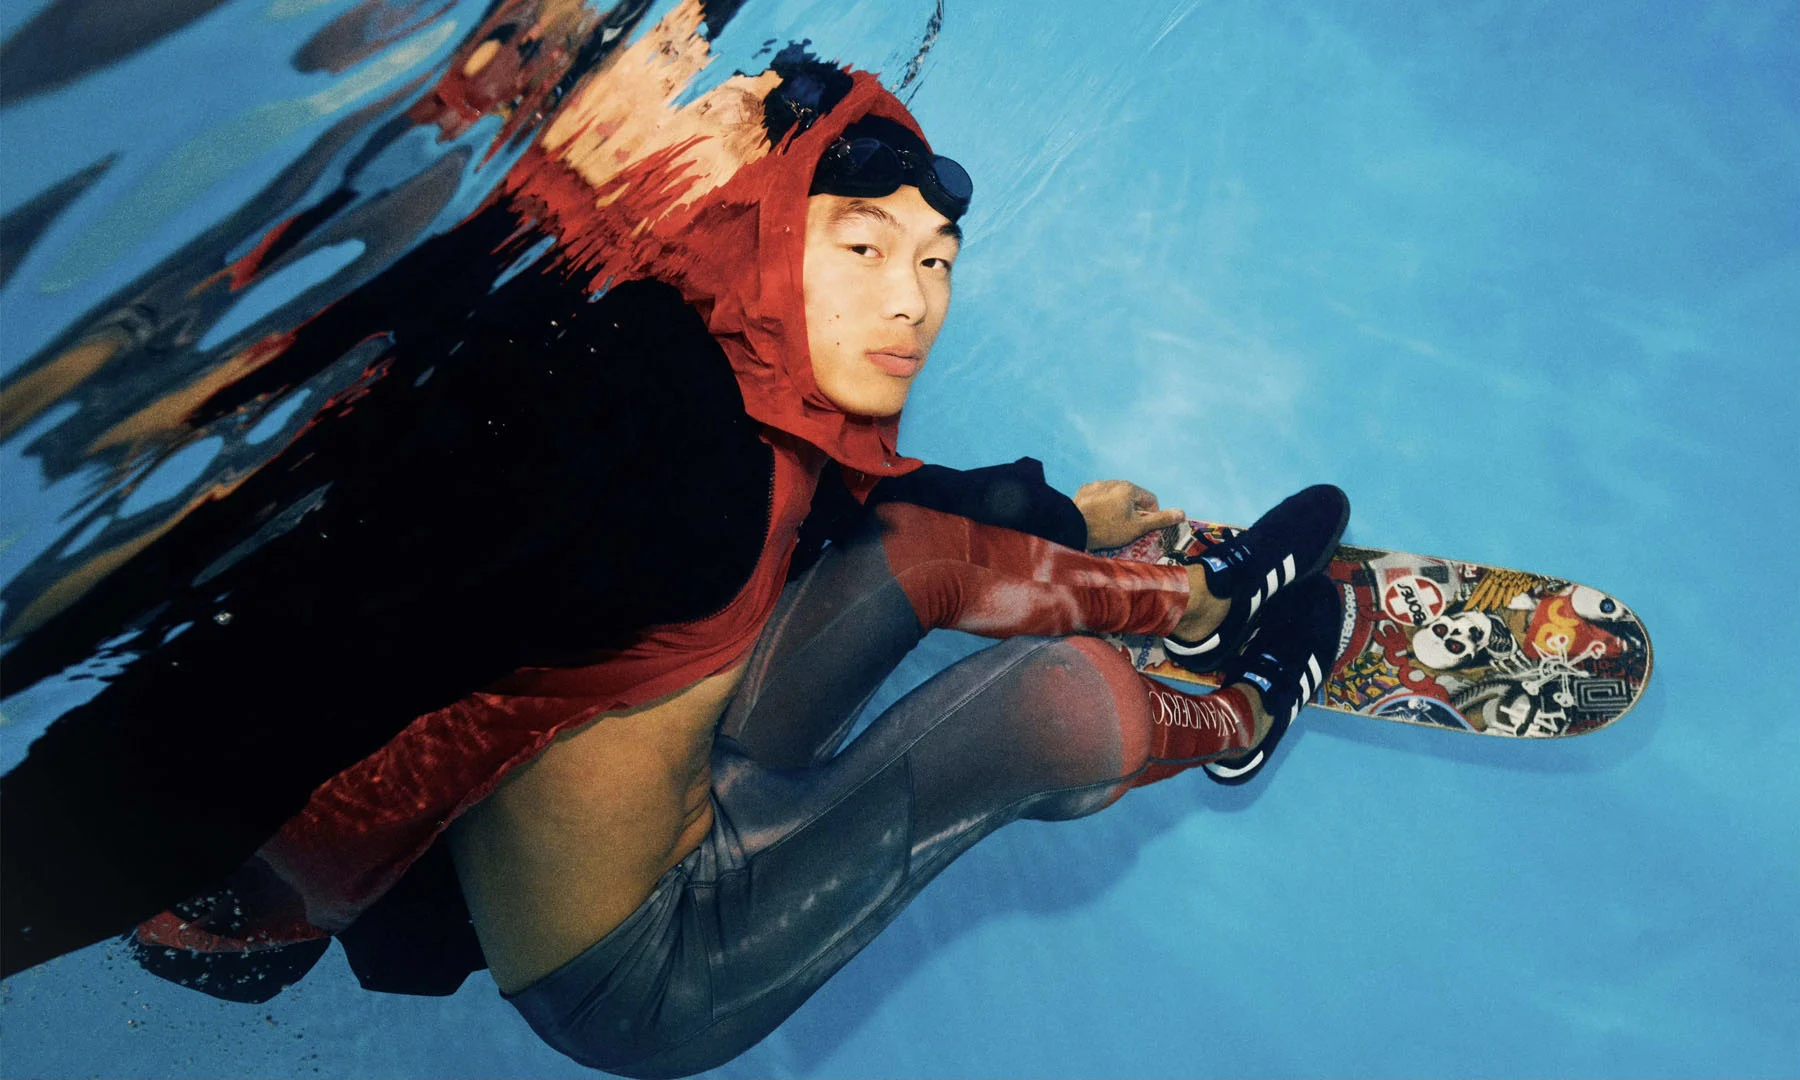 A photograph, taken below the surface of a body of water, of male model Yan performing challenging skateboard manouvers underwater.